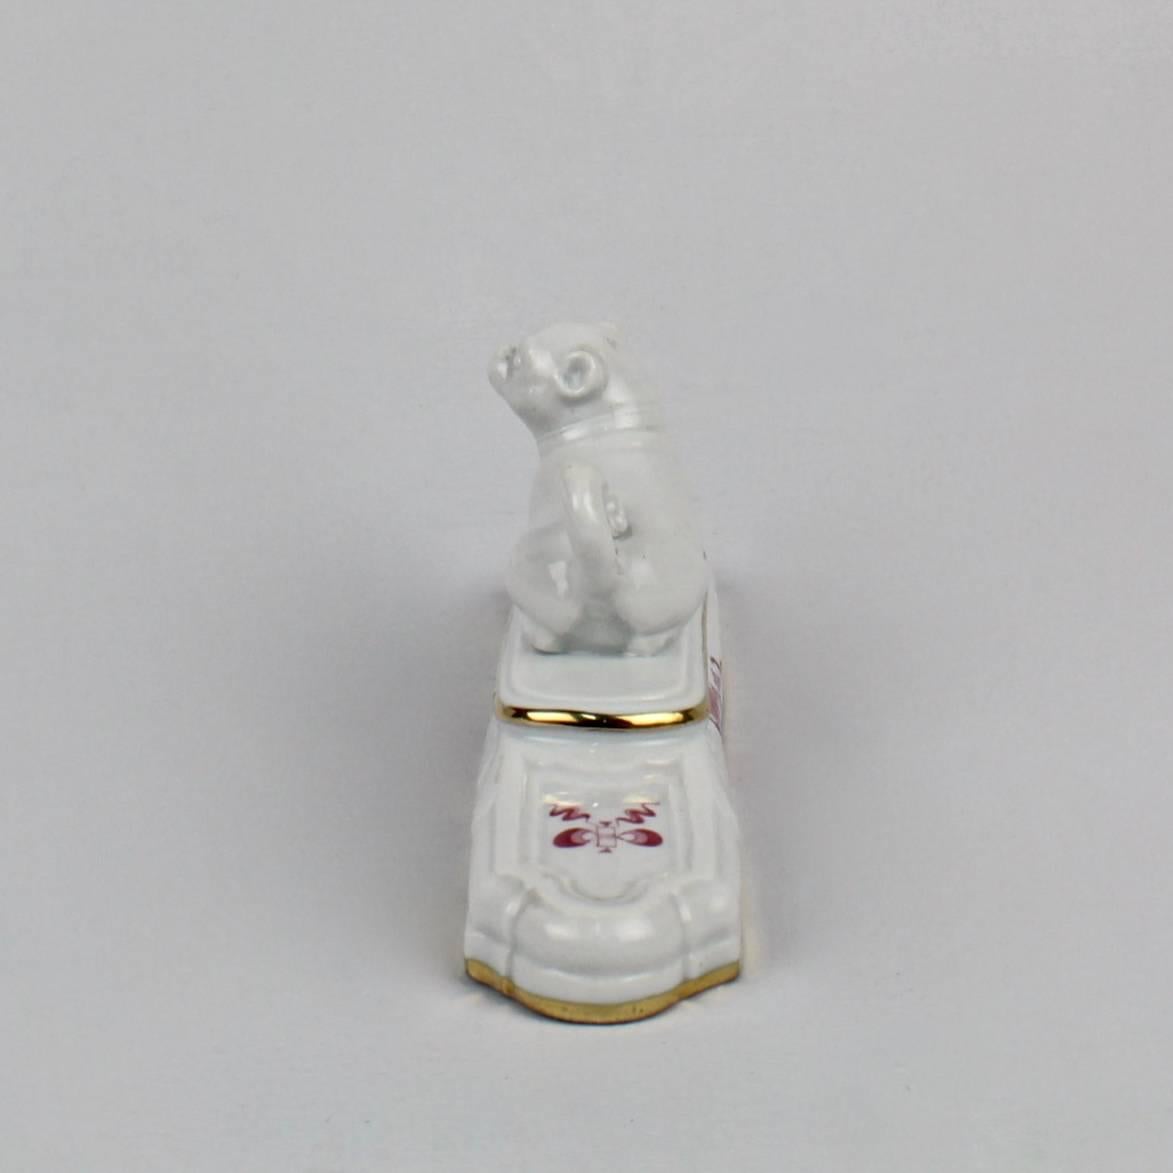 Cast Meissen Porcelain Figural Pug Paperweight in the Pink Court Dragon Pattern